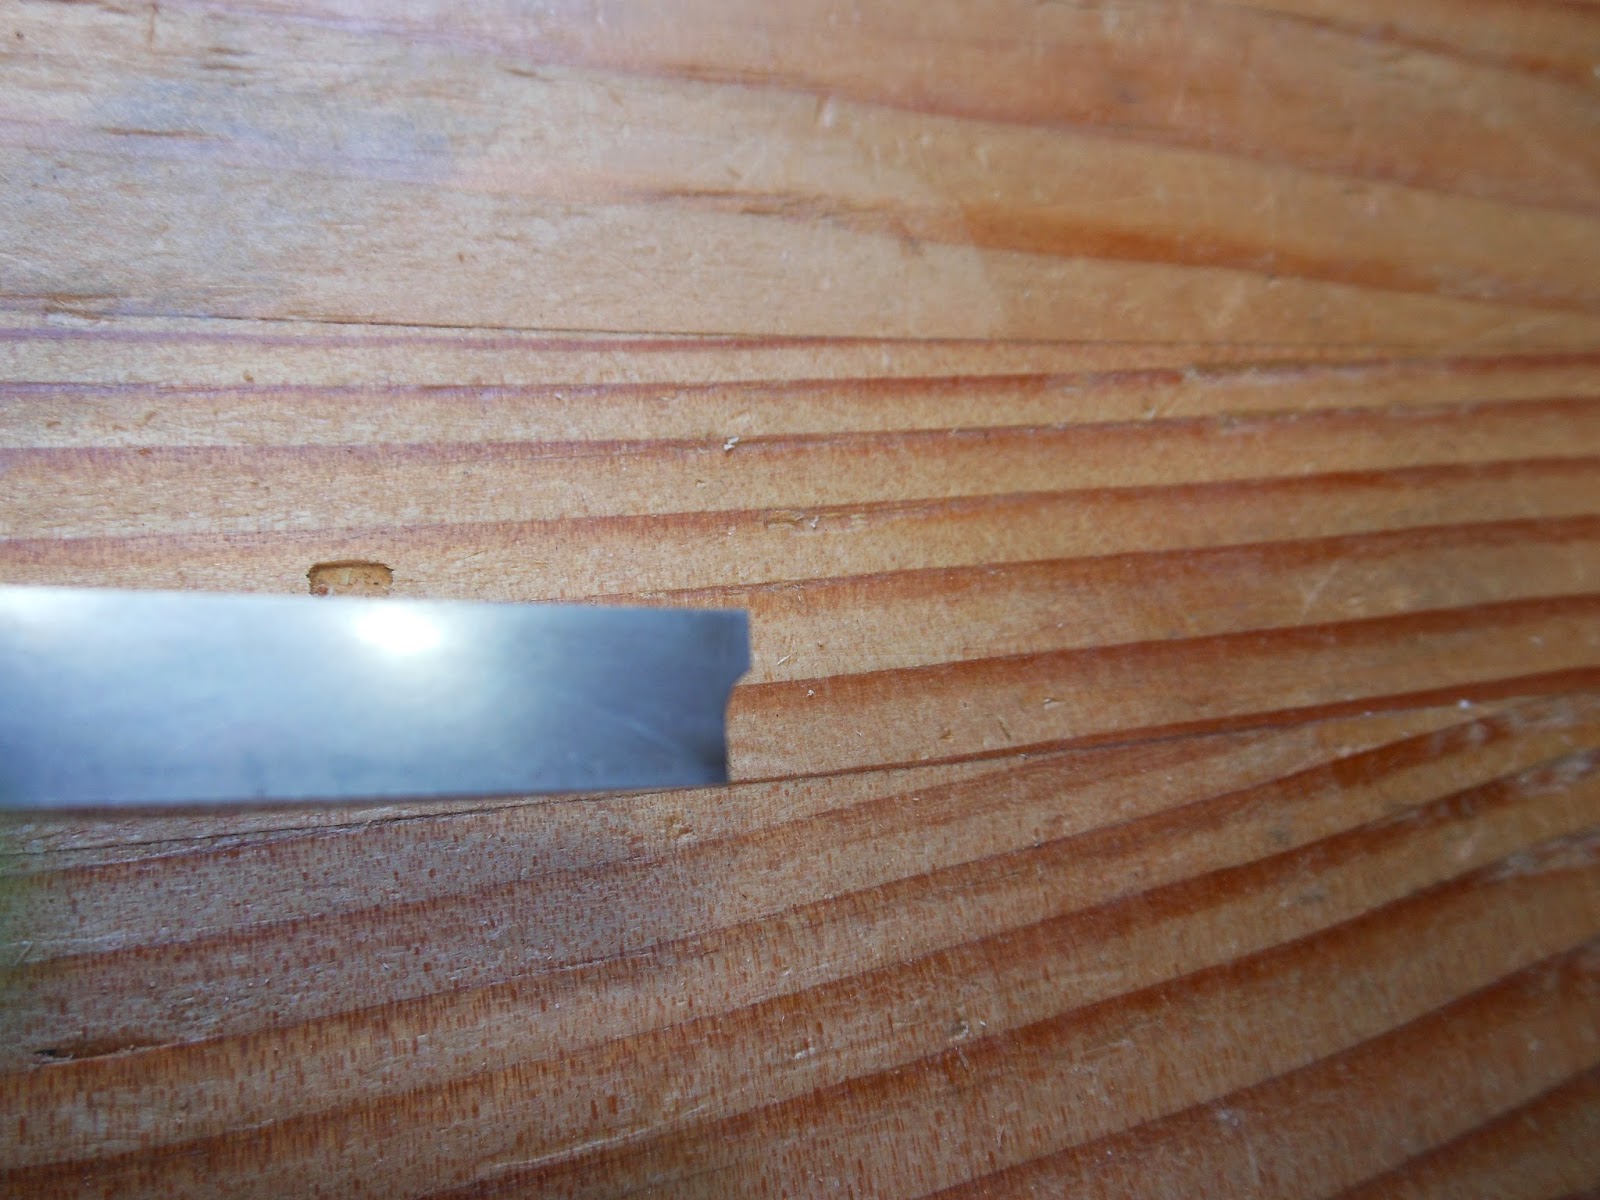 Chipped chisel